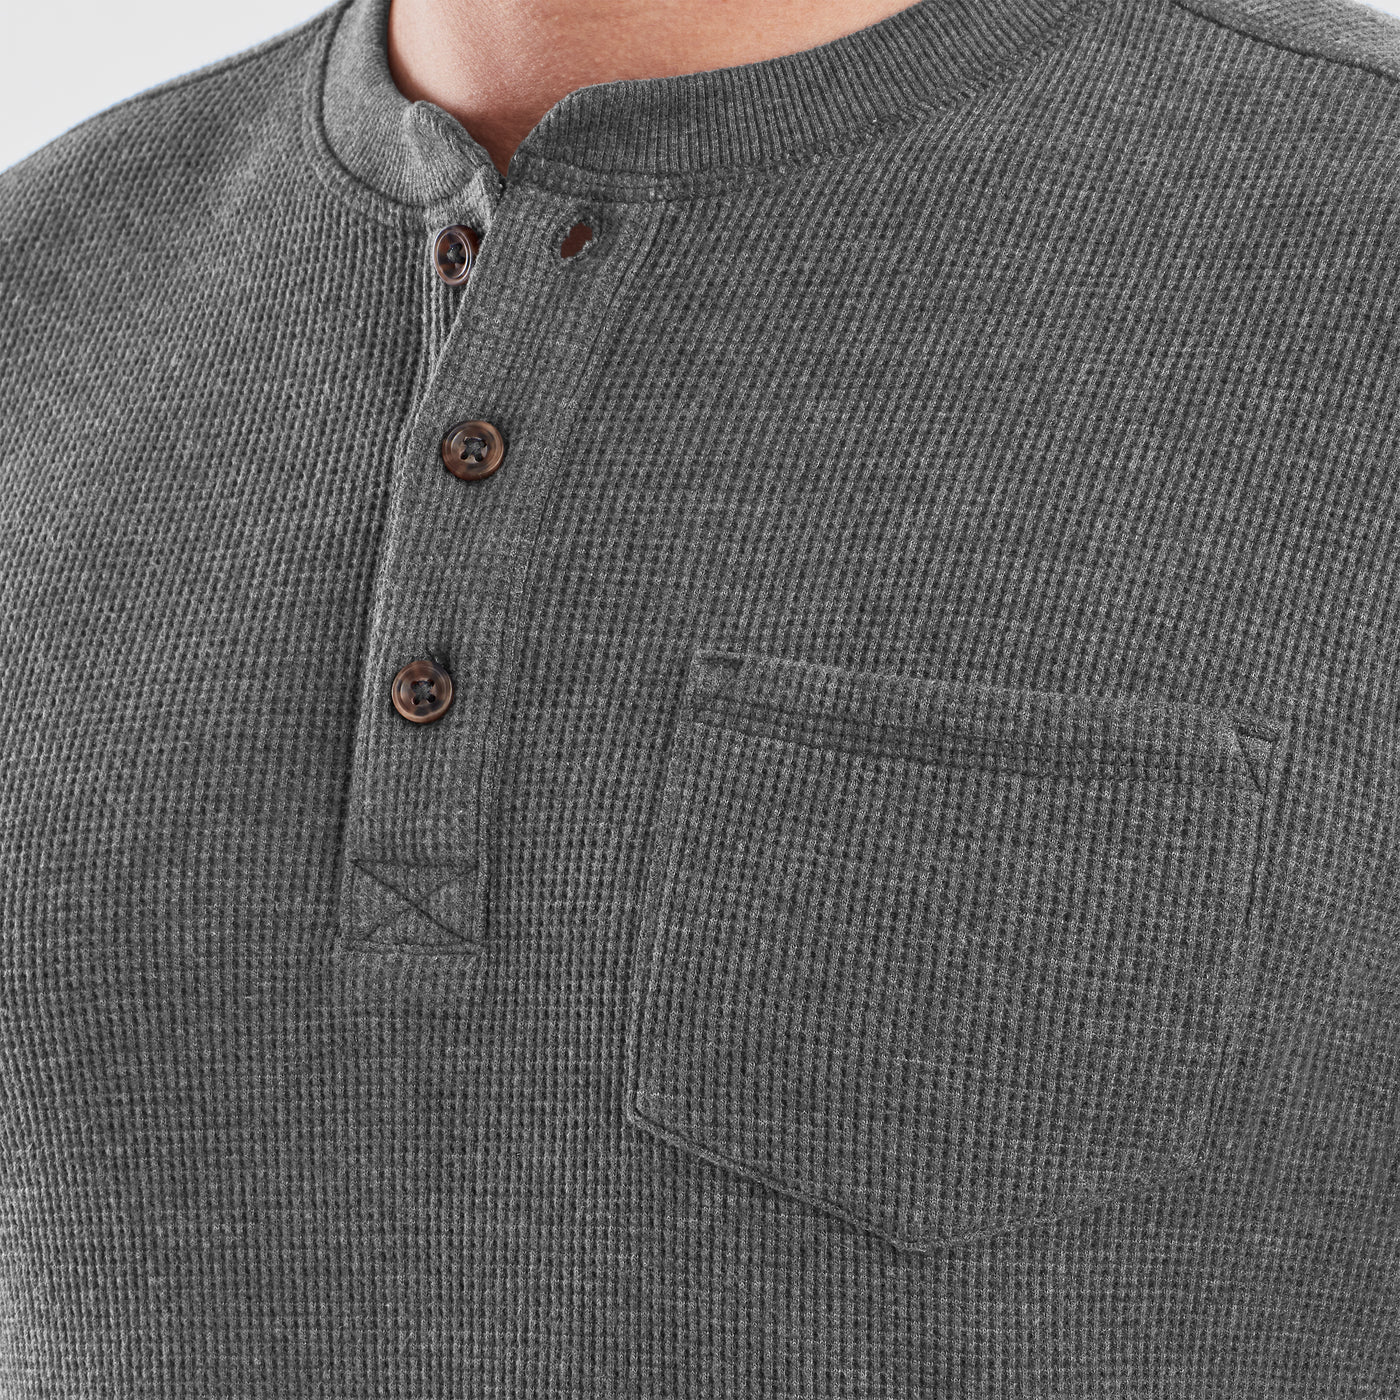 The Waffle-Knit Henley, 41% OFF